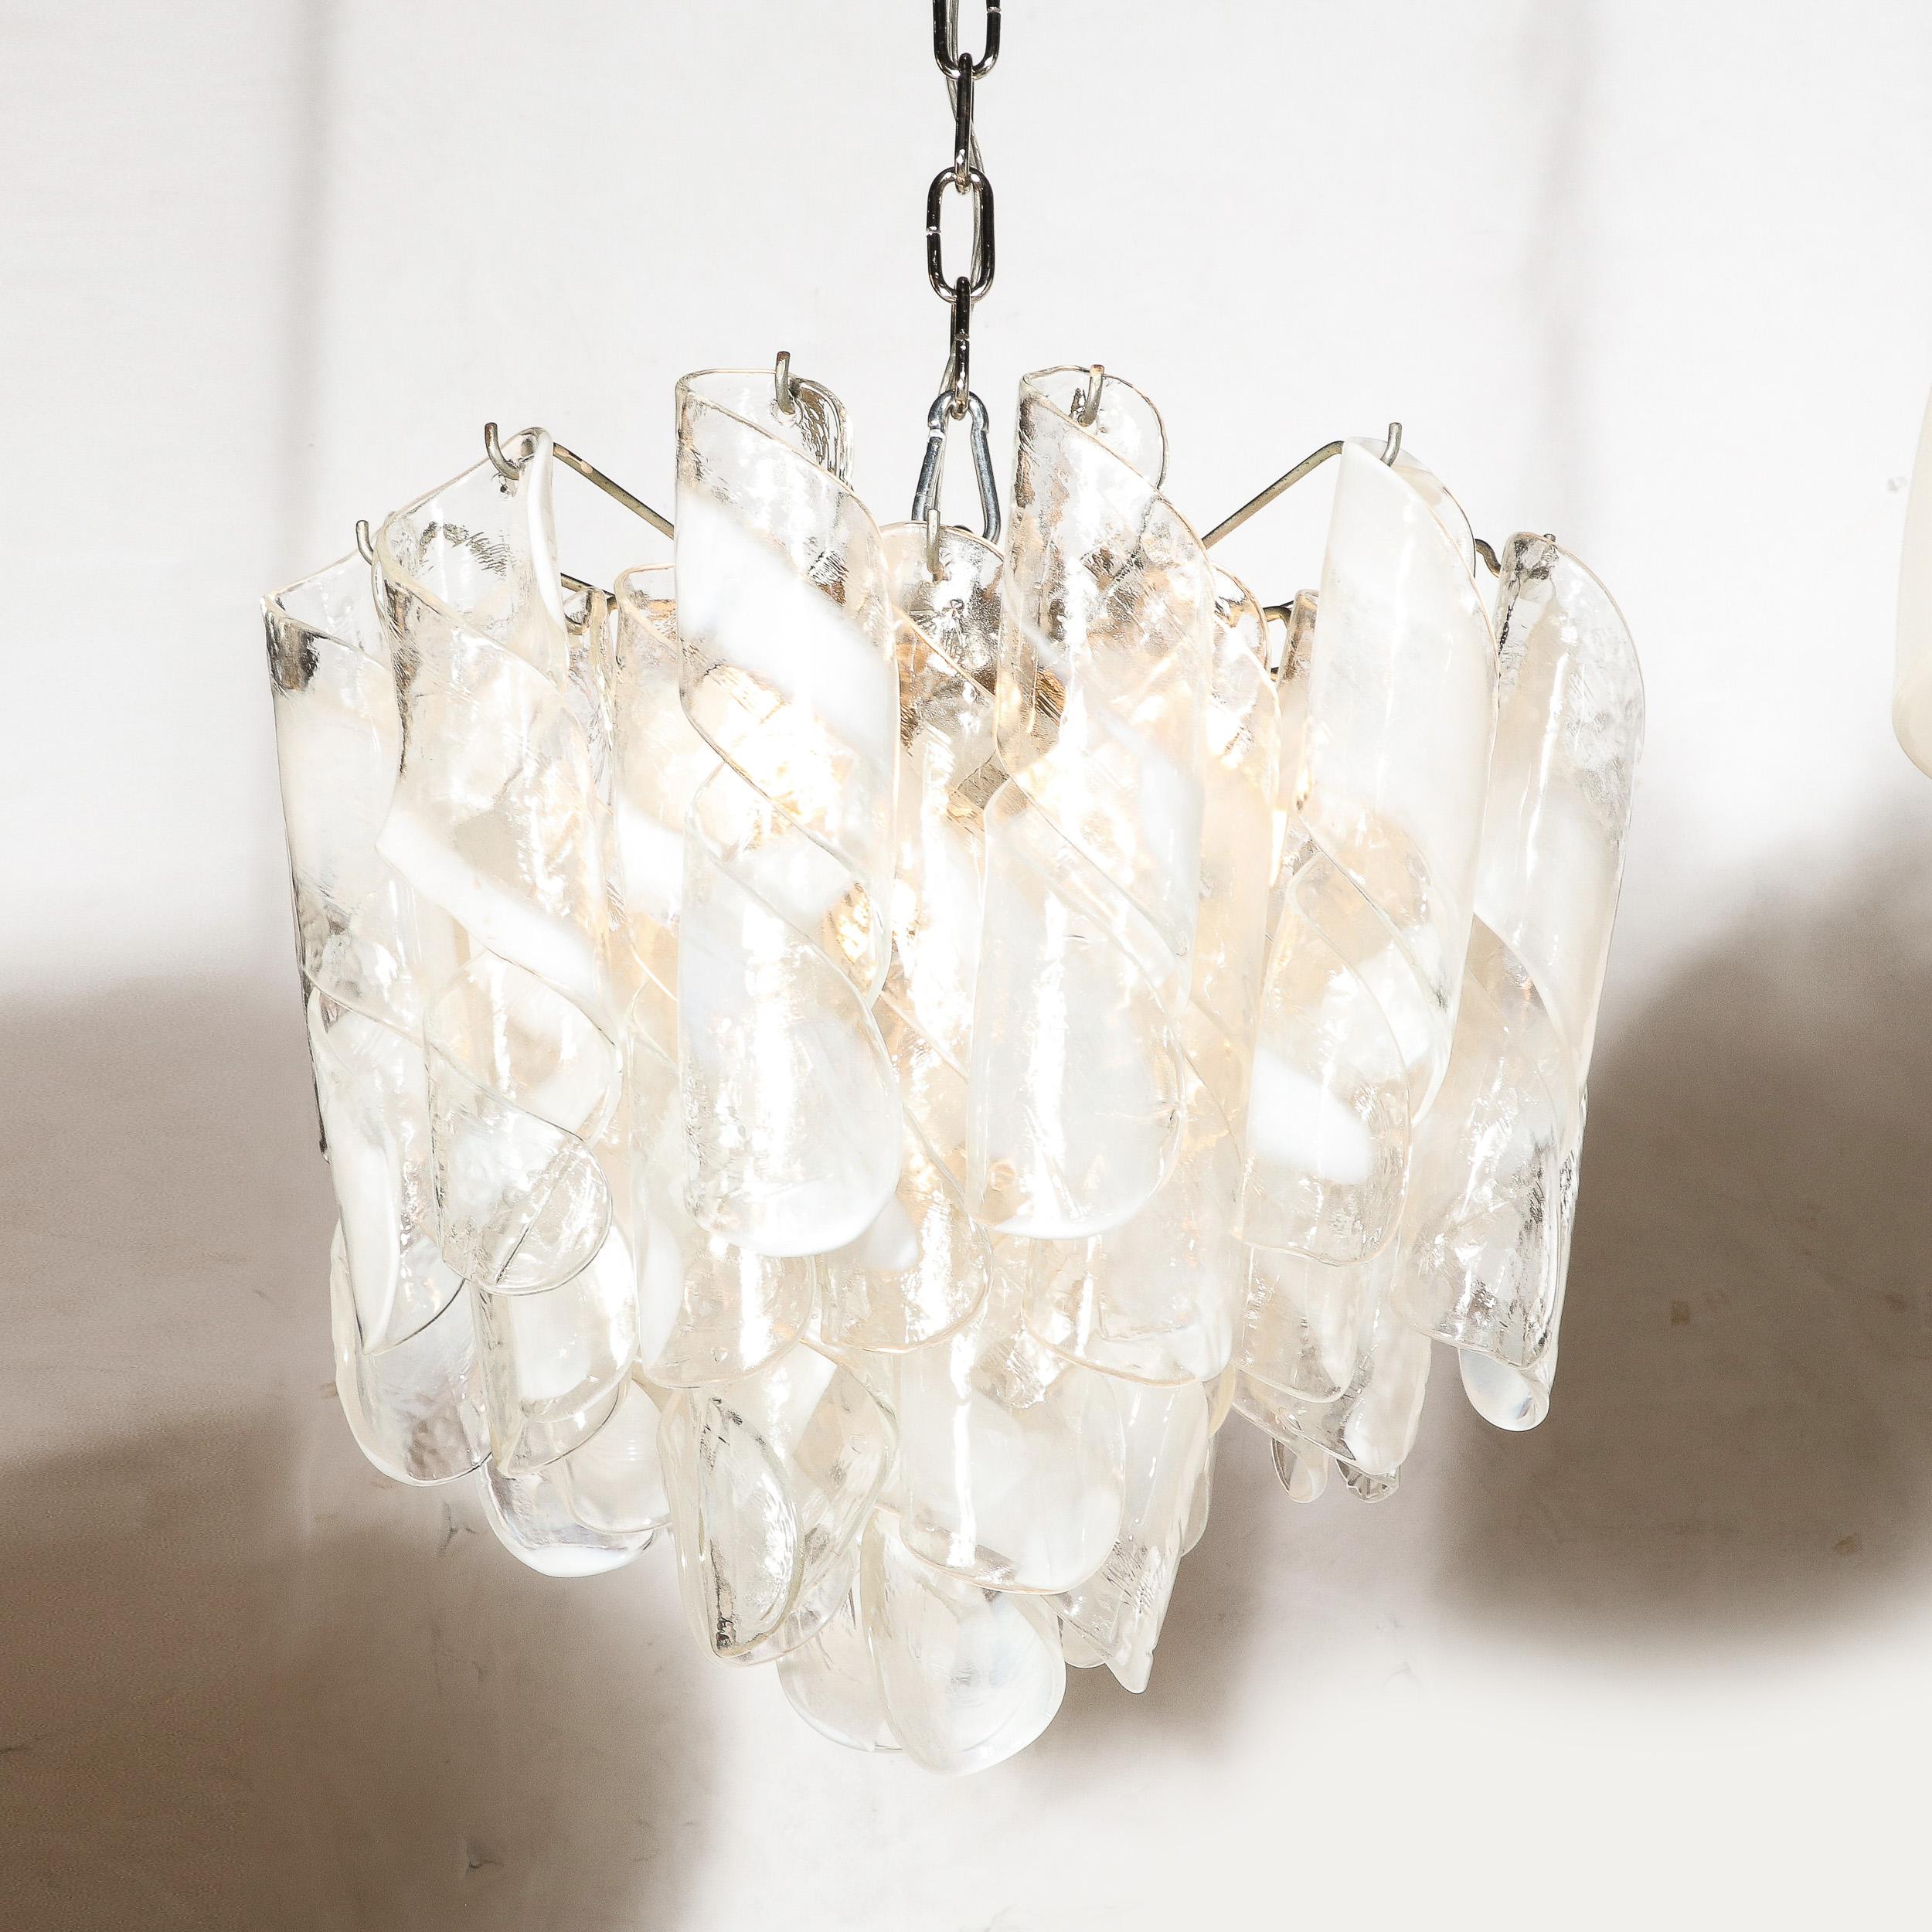 Mid-Century Modernist Hand-Blown Murano Glass Torciglioni Chandelier By Mazzega For Sale 5